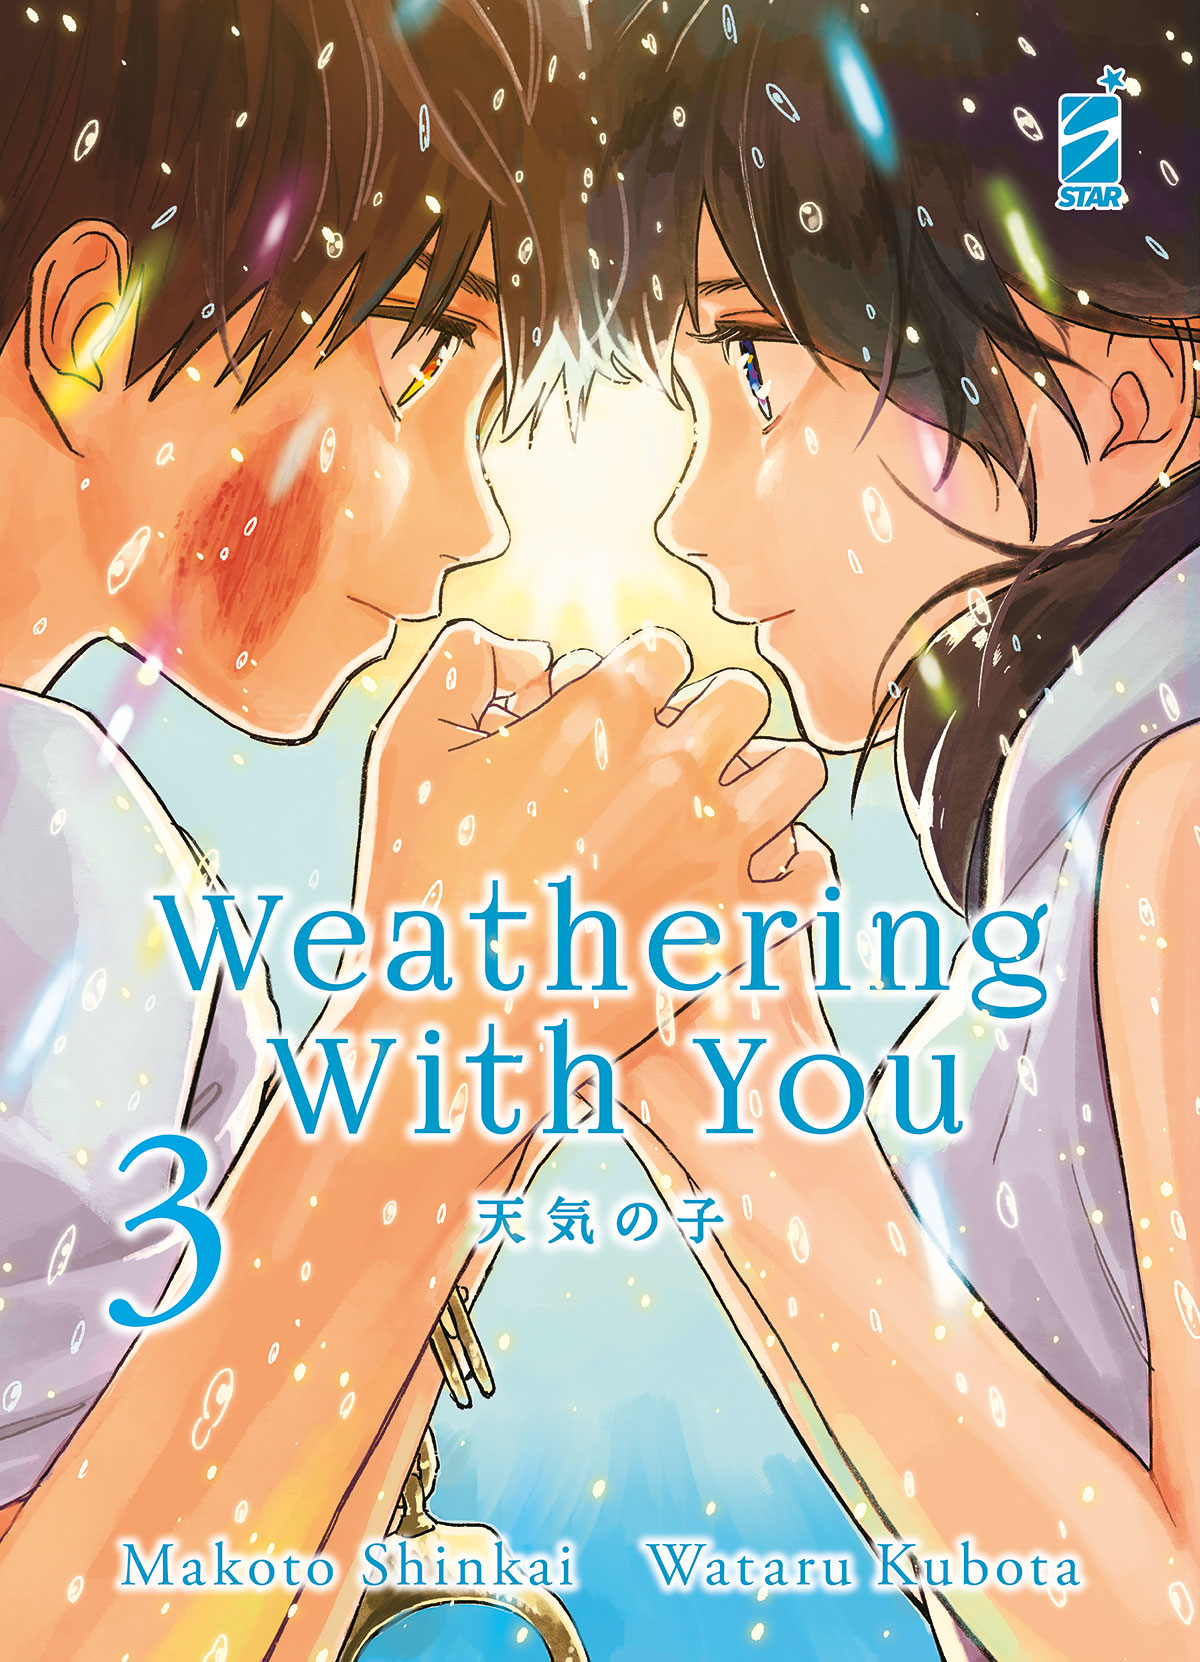 Weathering With You 3